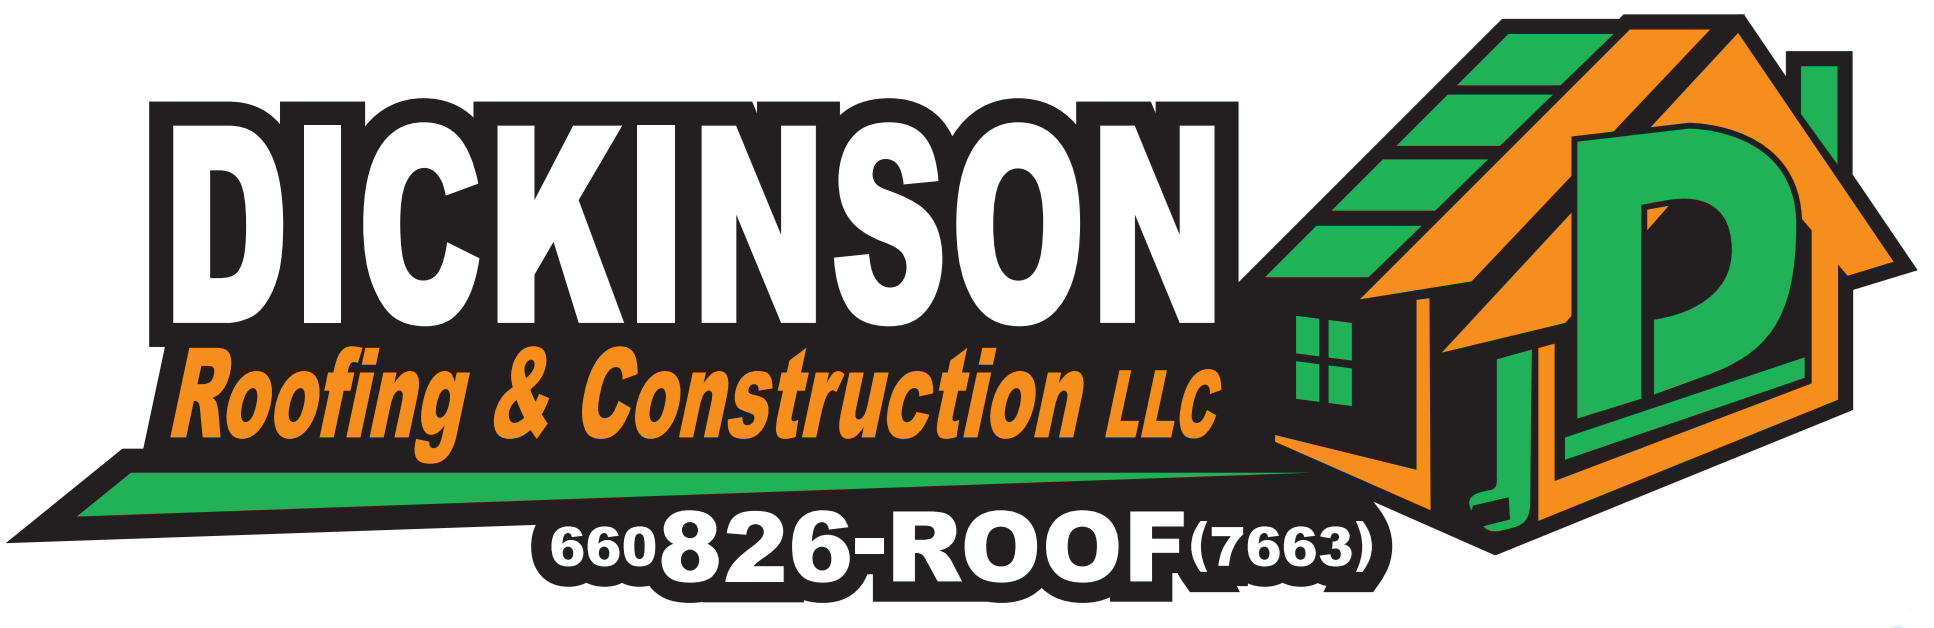 Dickinson Roofing and Construction logo